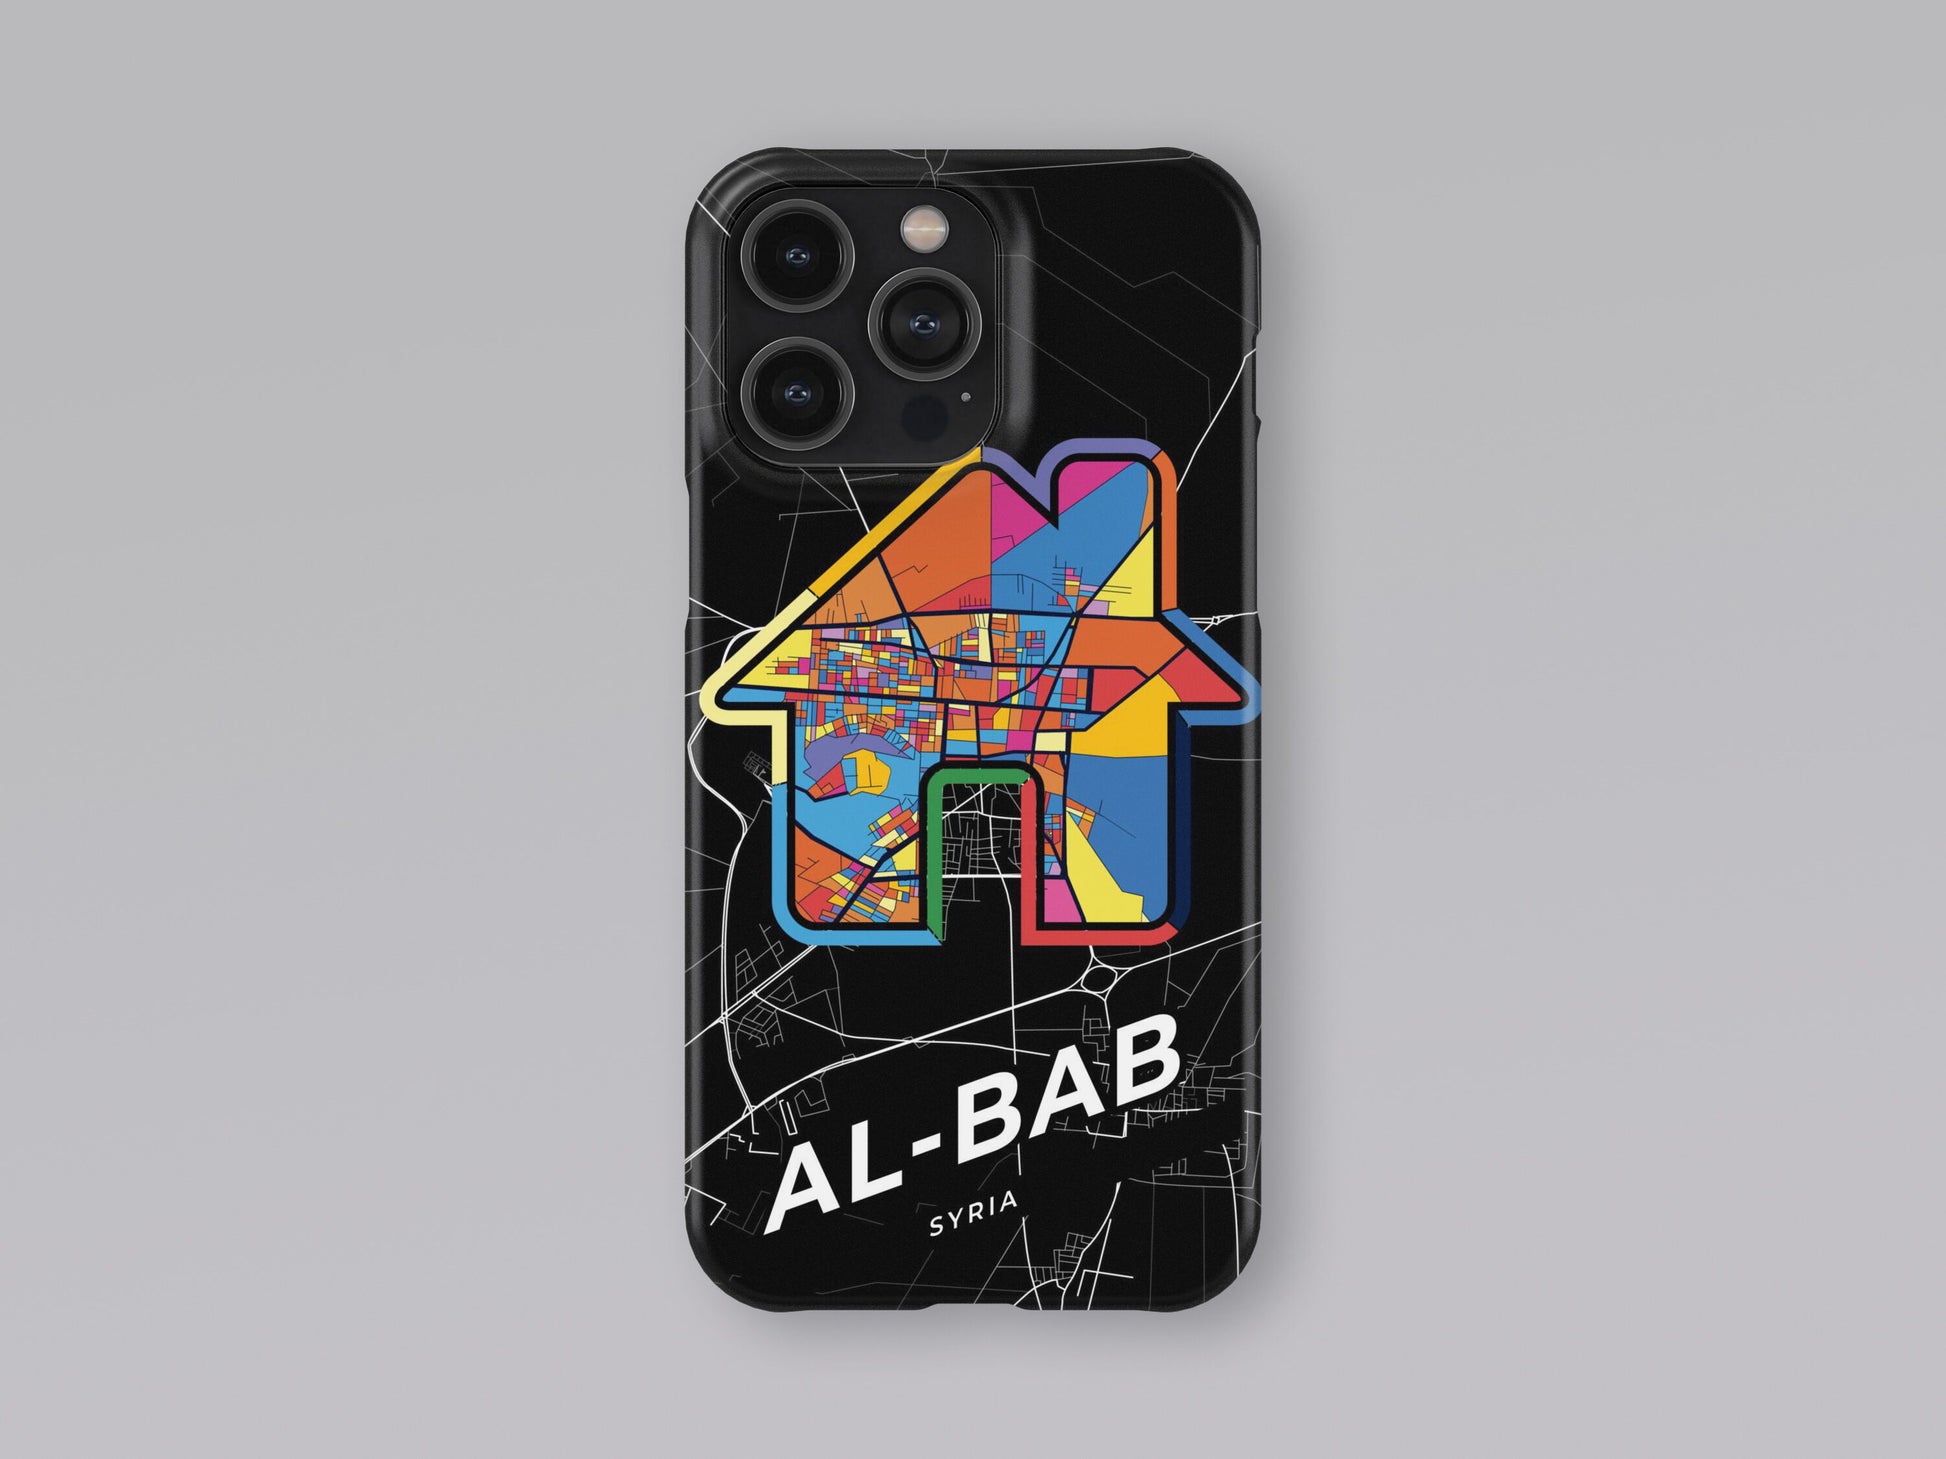 Al-Bab Syria slim phone case with colorful icon. Birthday, wedding or housewarming gift. Couple match cases. 3